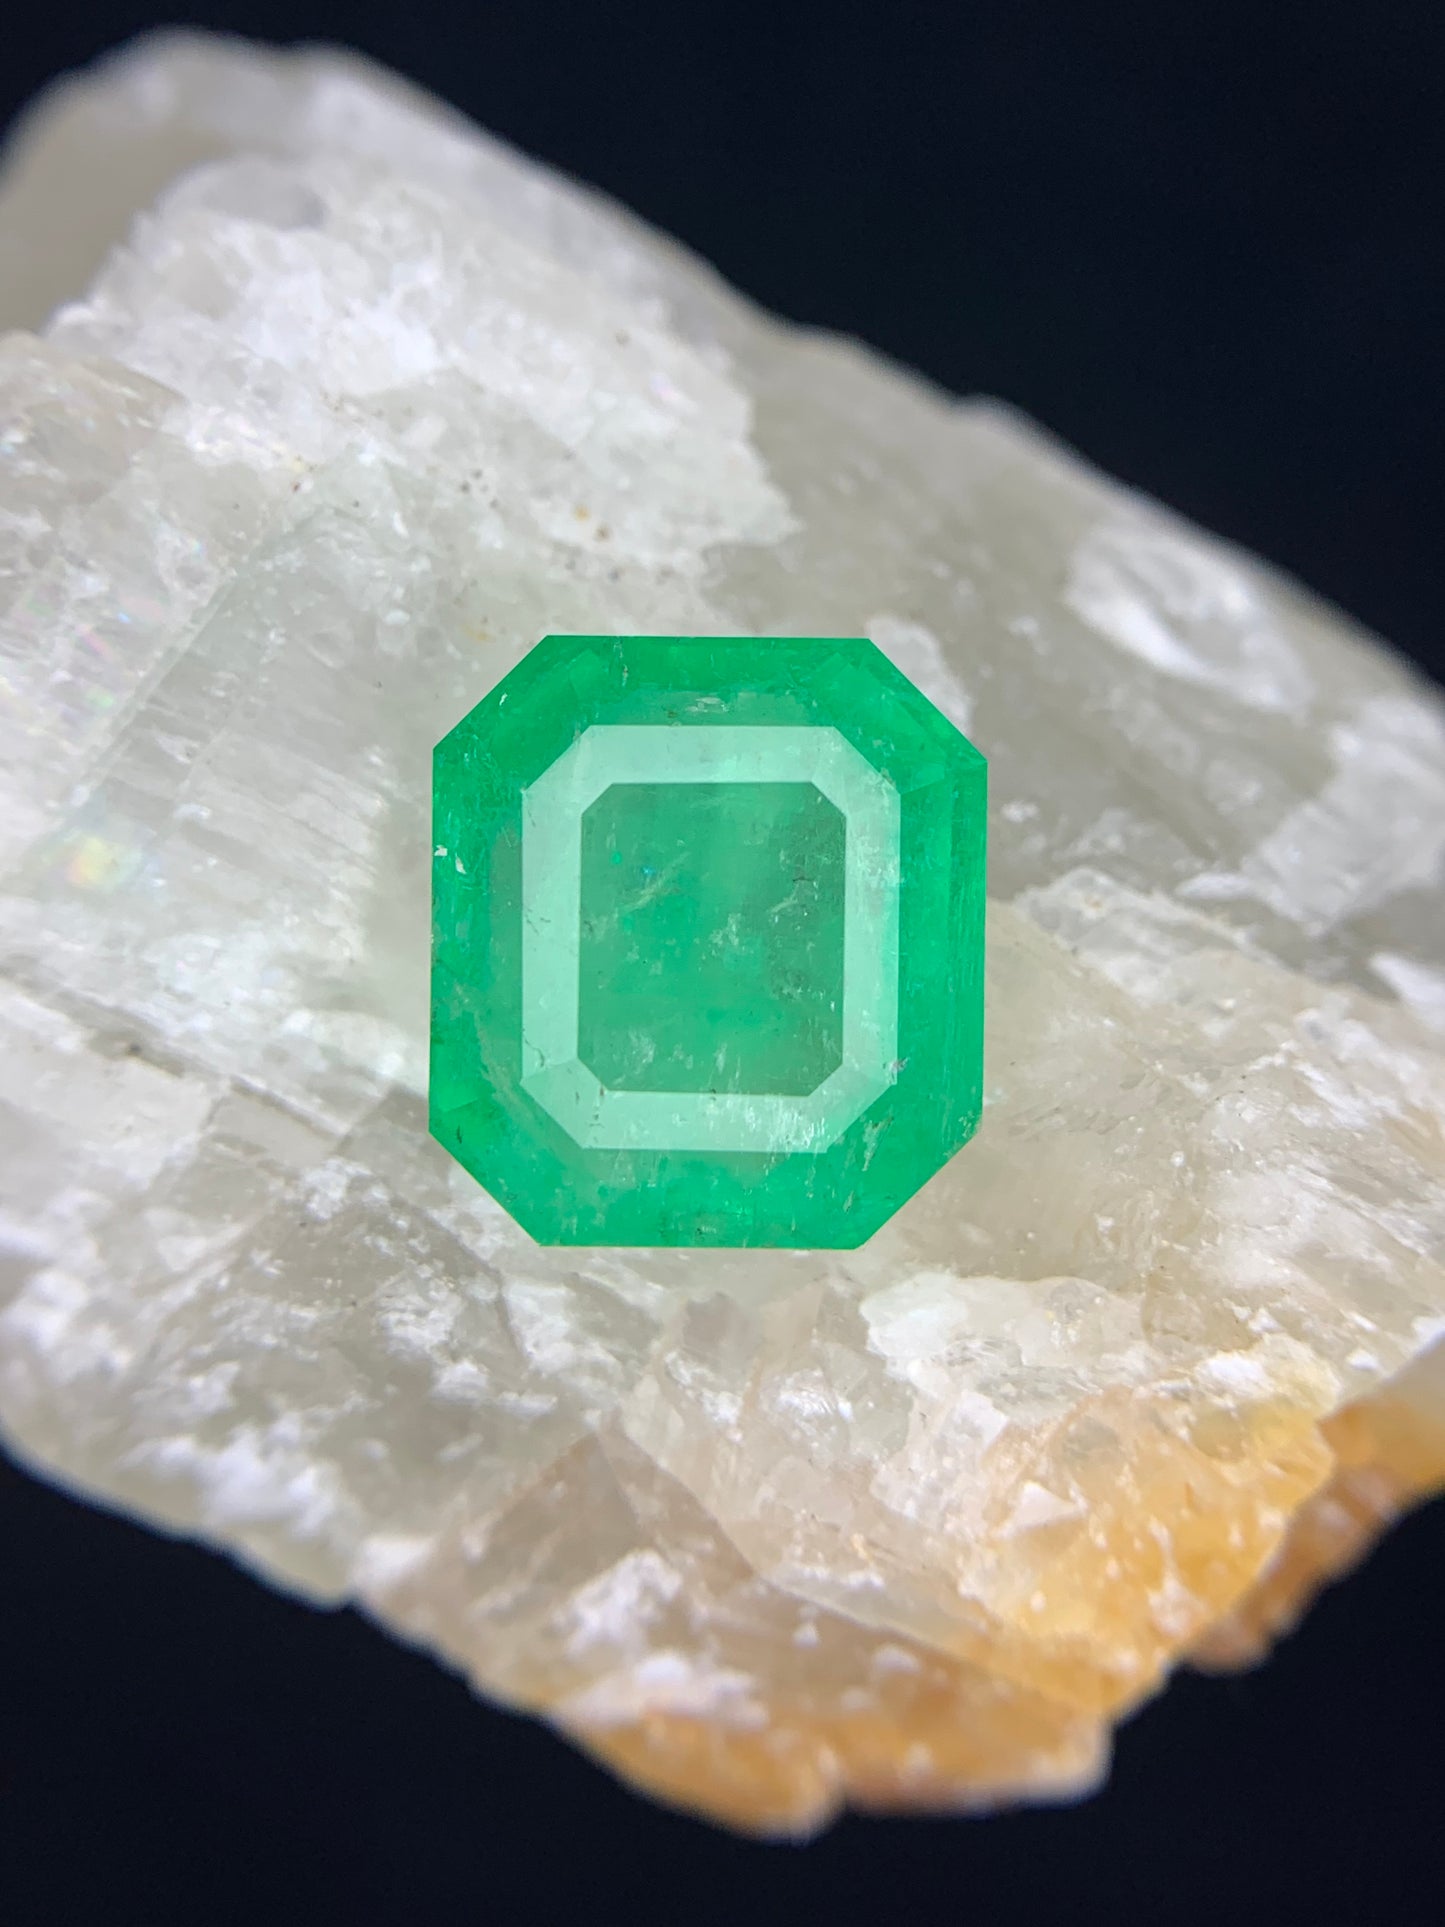 4.74 cts Vivid Green Colombian Emerald.